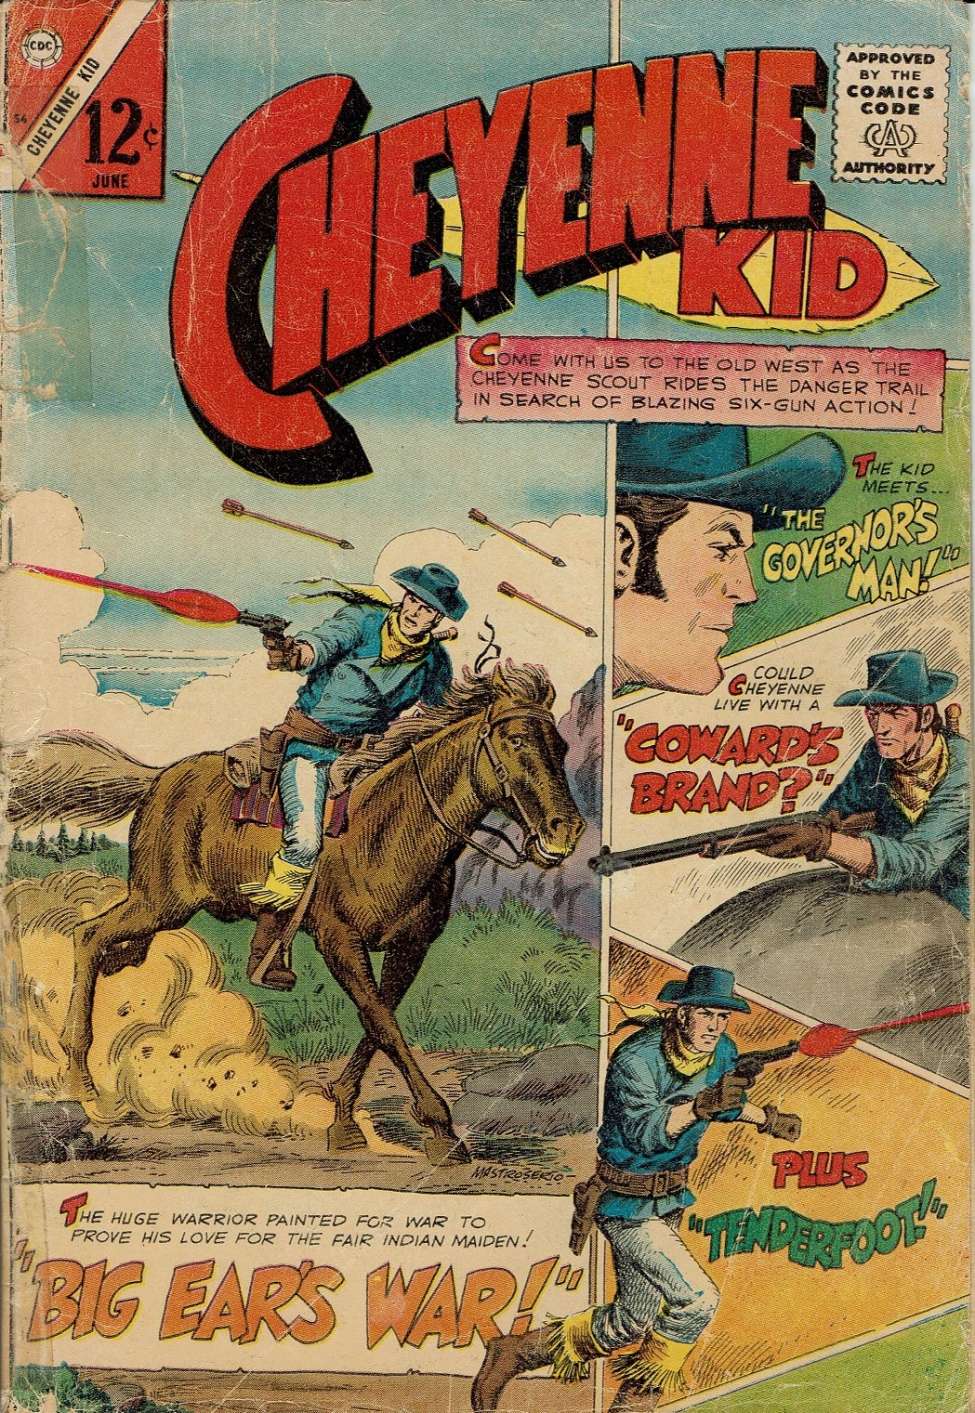 Book Cover For Cheyenne Kid 56